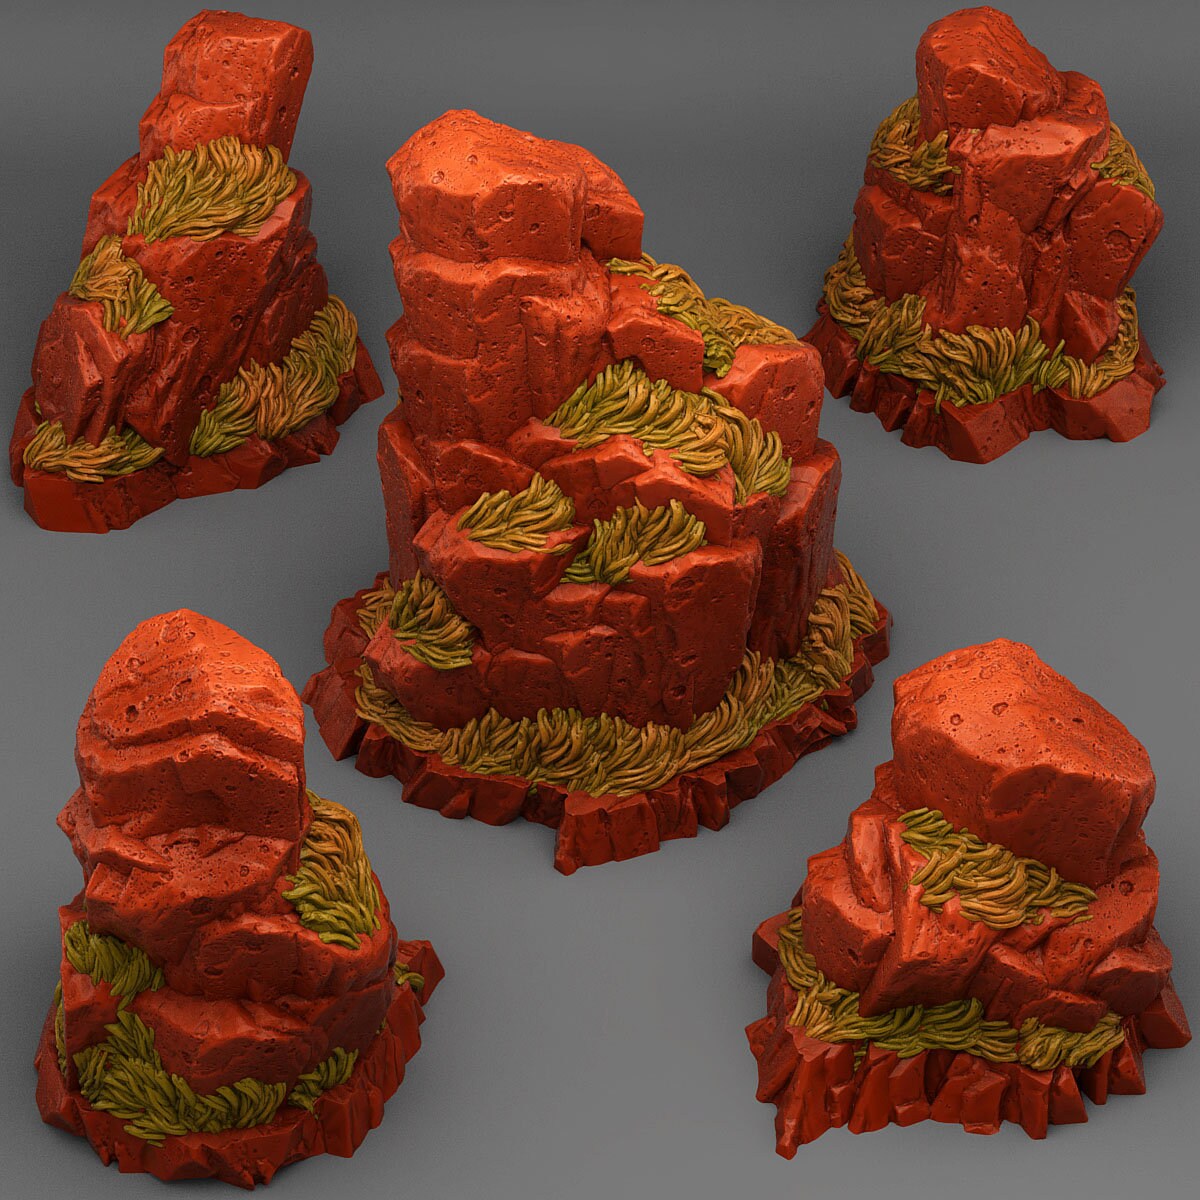 Red Giant Rocks Scatter Terrain - Fantastic Plants and Rocks | Print Your Monsters | DnD | Wargaming | Stones